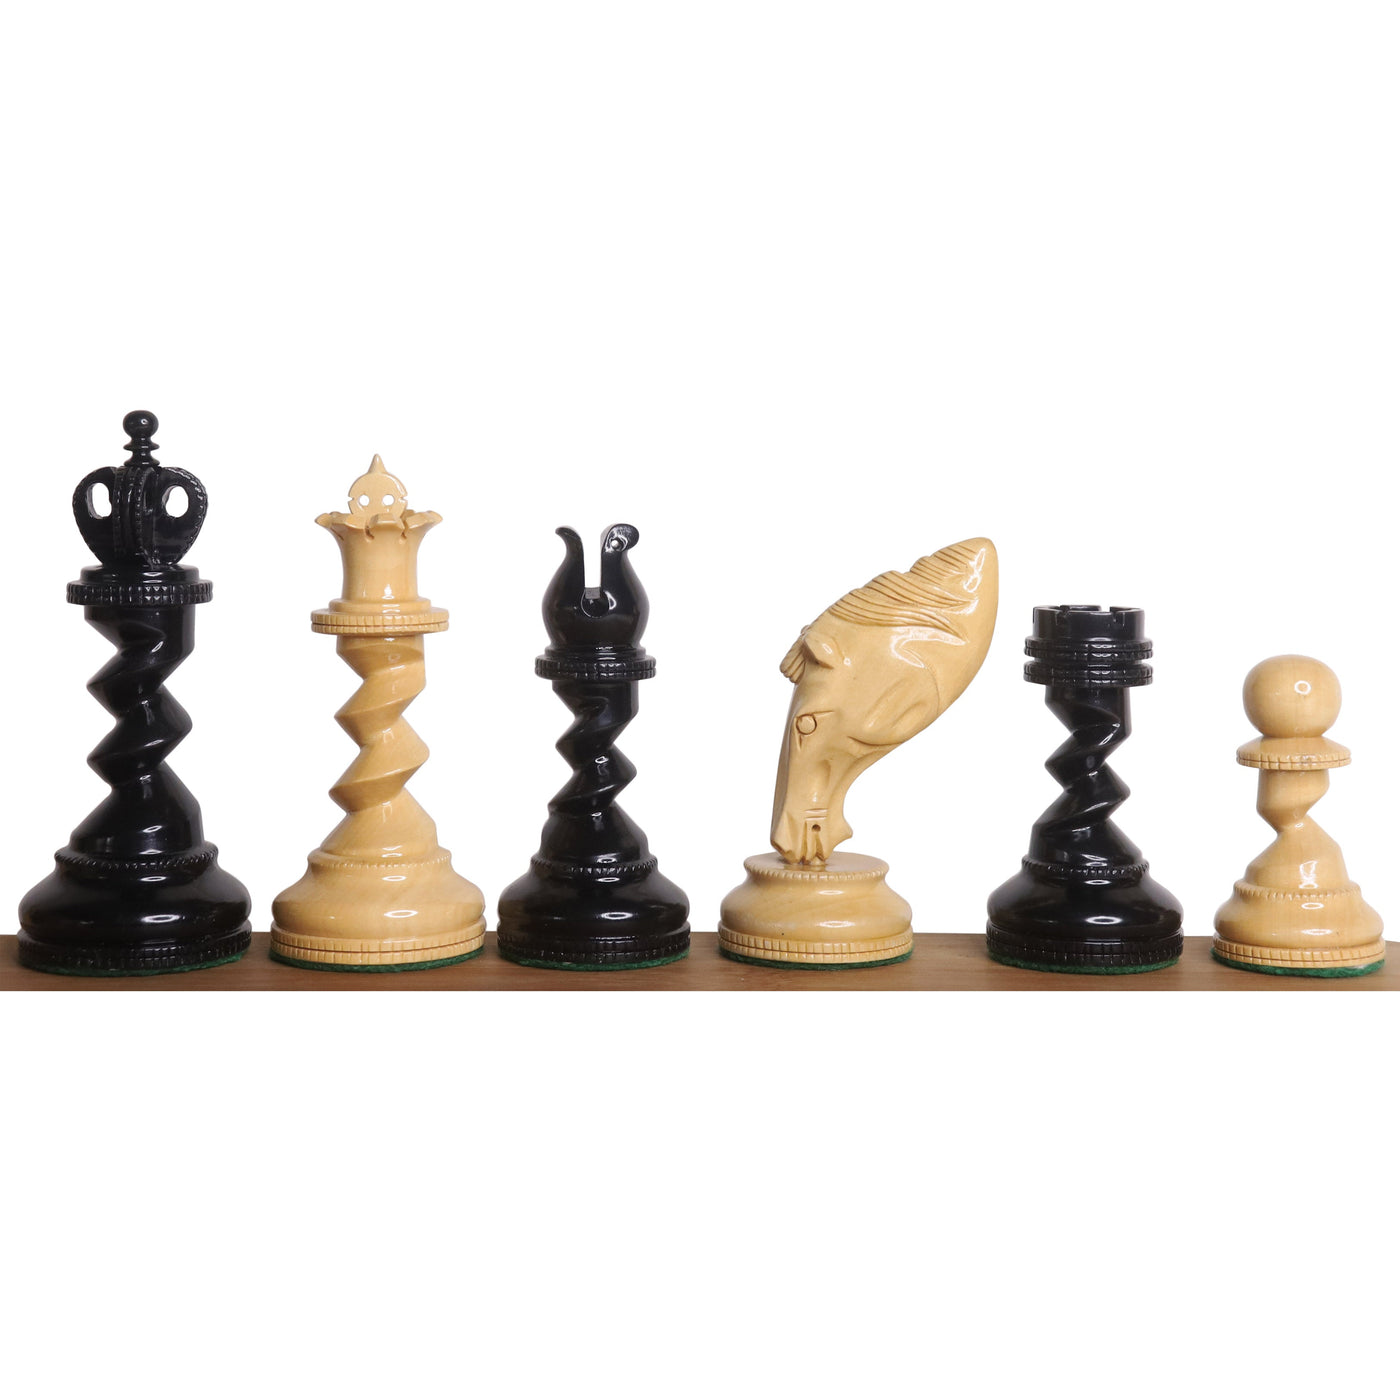 Slightly Imperfect 4.3" Grazing Knight Luxury Staunton Chess Set - Chess Pieces Only-Lacquered Ebony Wood